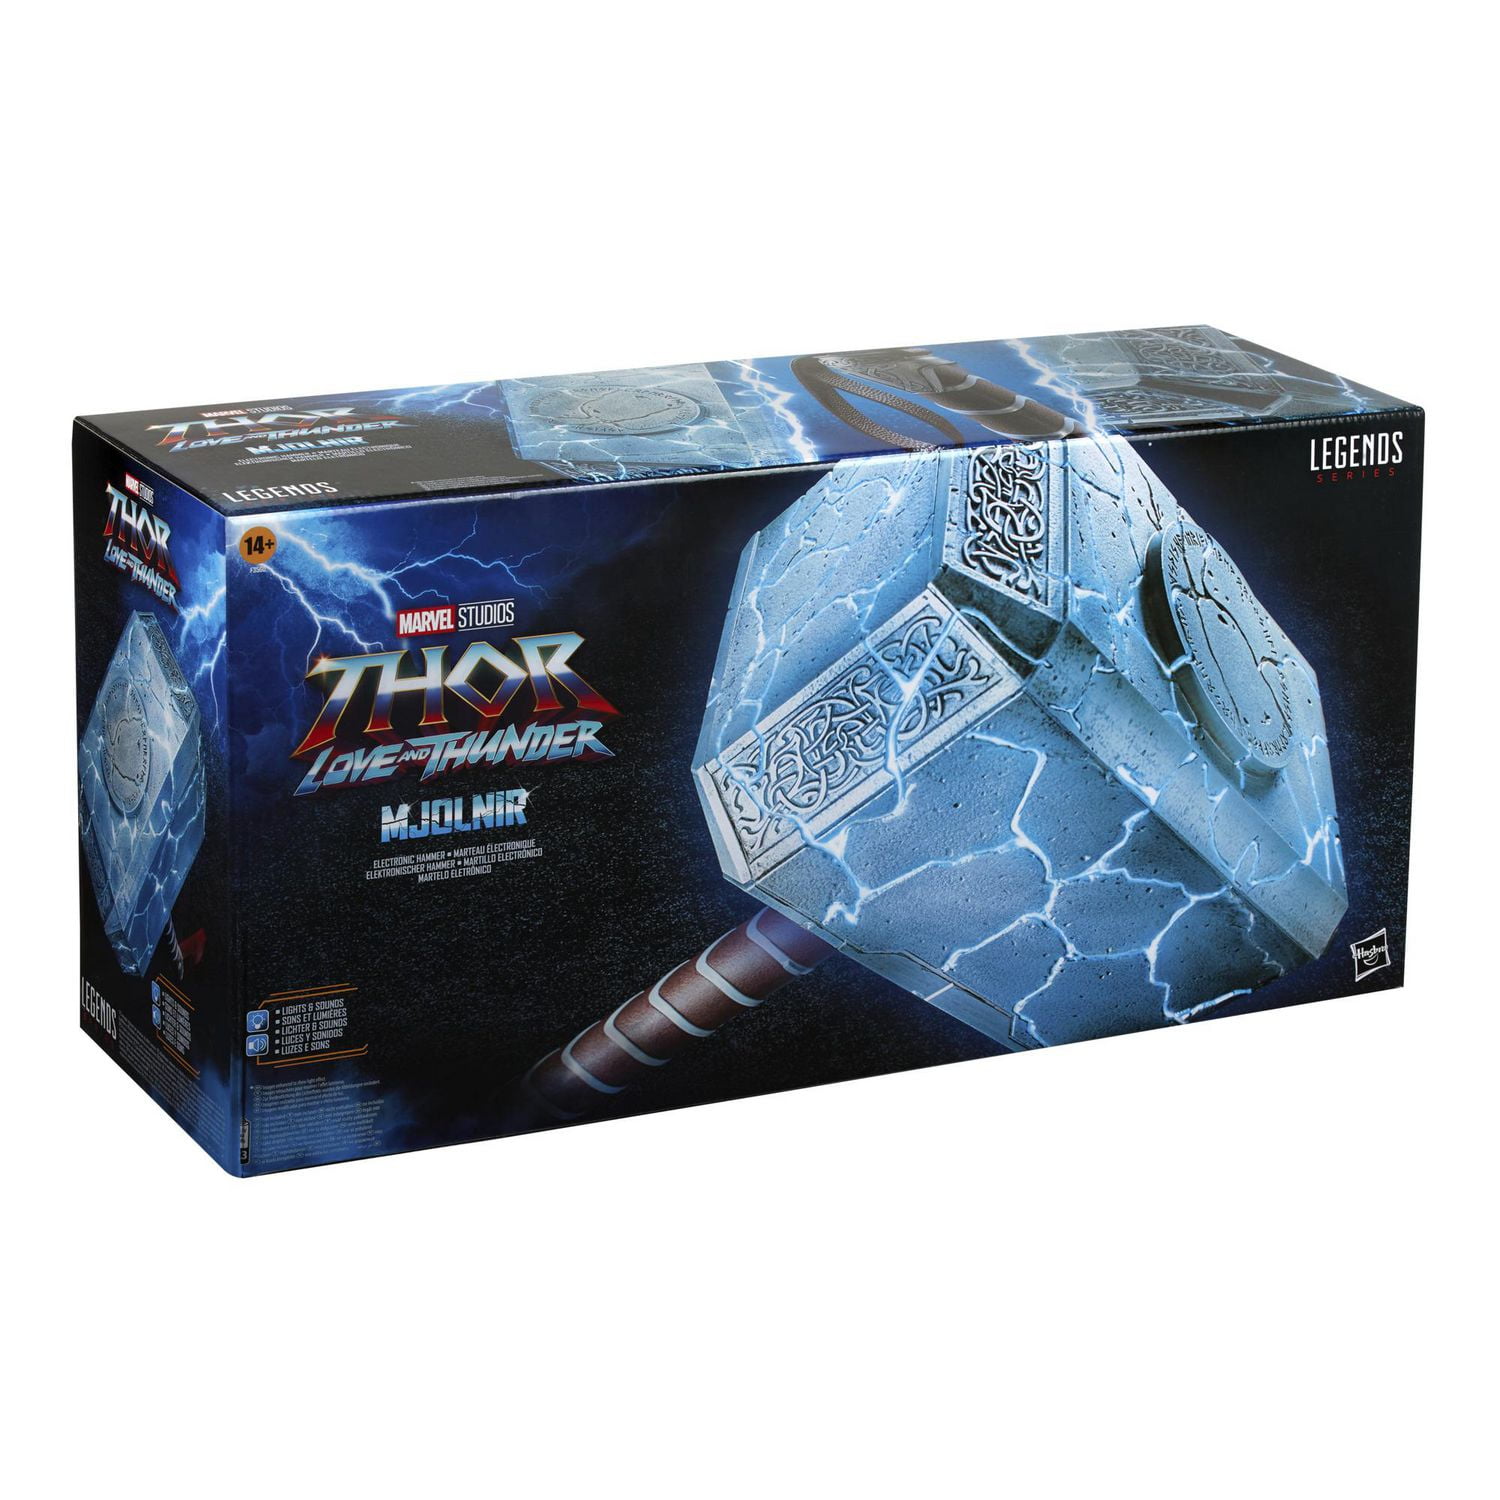 Thor Love and Thunder Mjolnir Electronic Hammer Costume Accessory, by Marvel